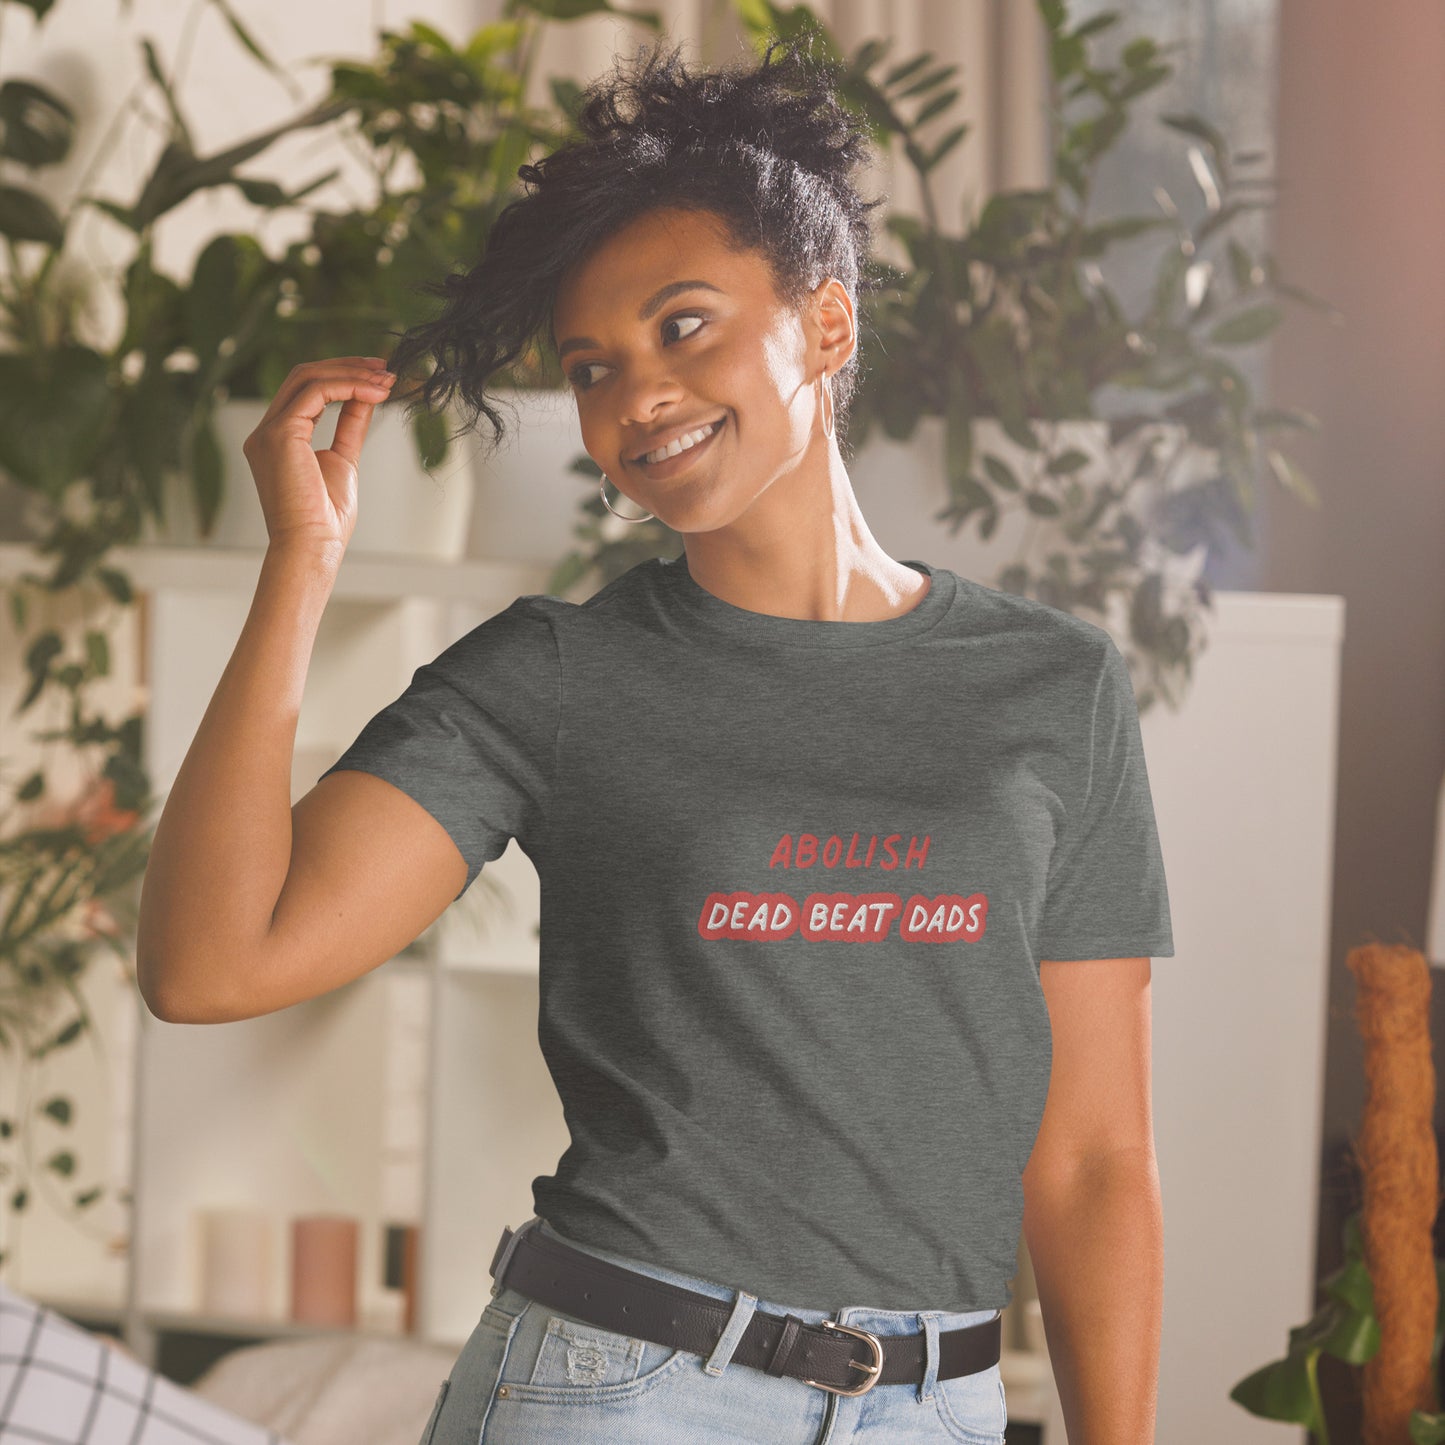 Abolish Dead Beat Dad's Embroidered Unisex T-Shirt